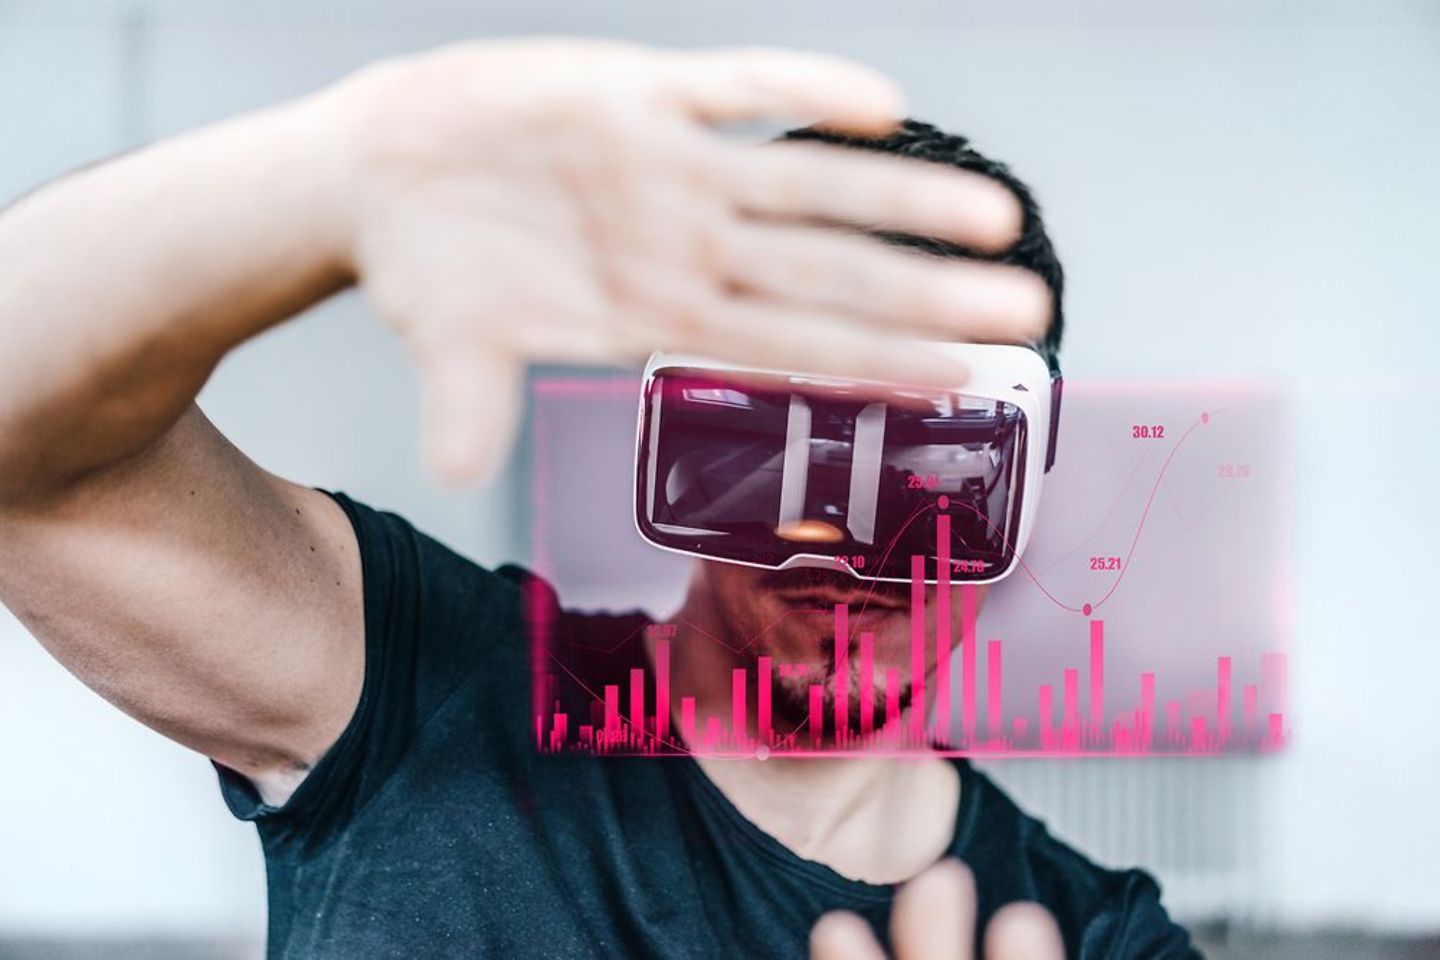 Man wearing VR glasses moves his hands in front of magenta colored chart